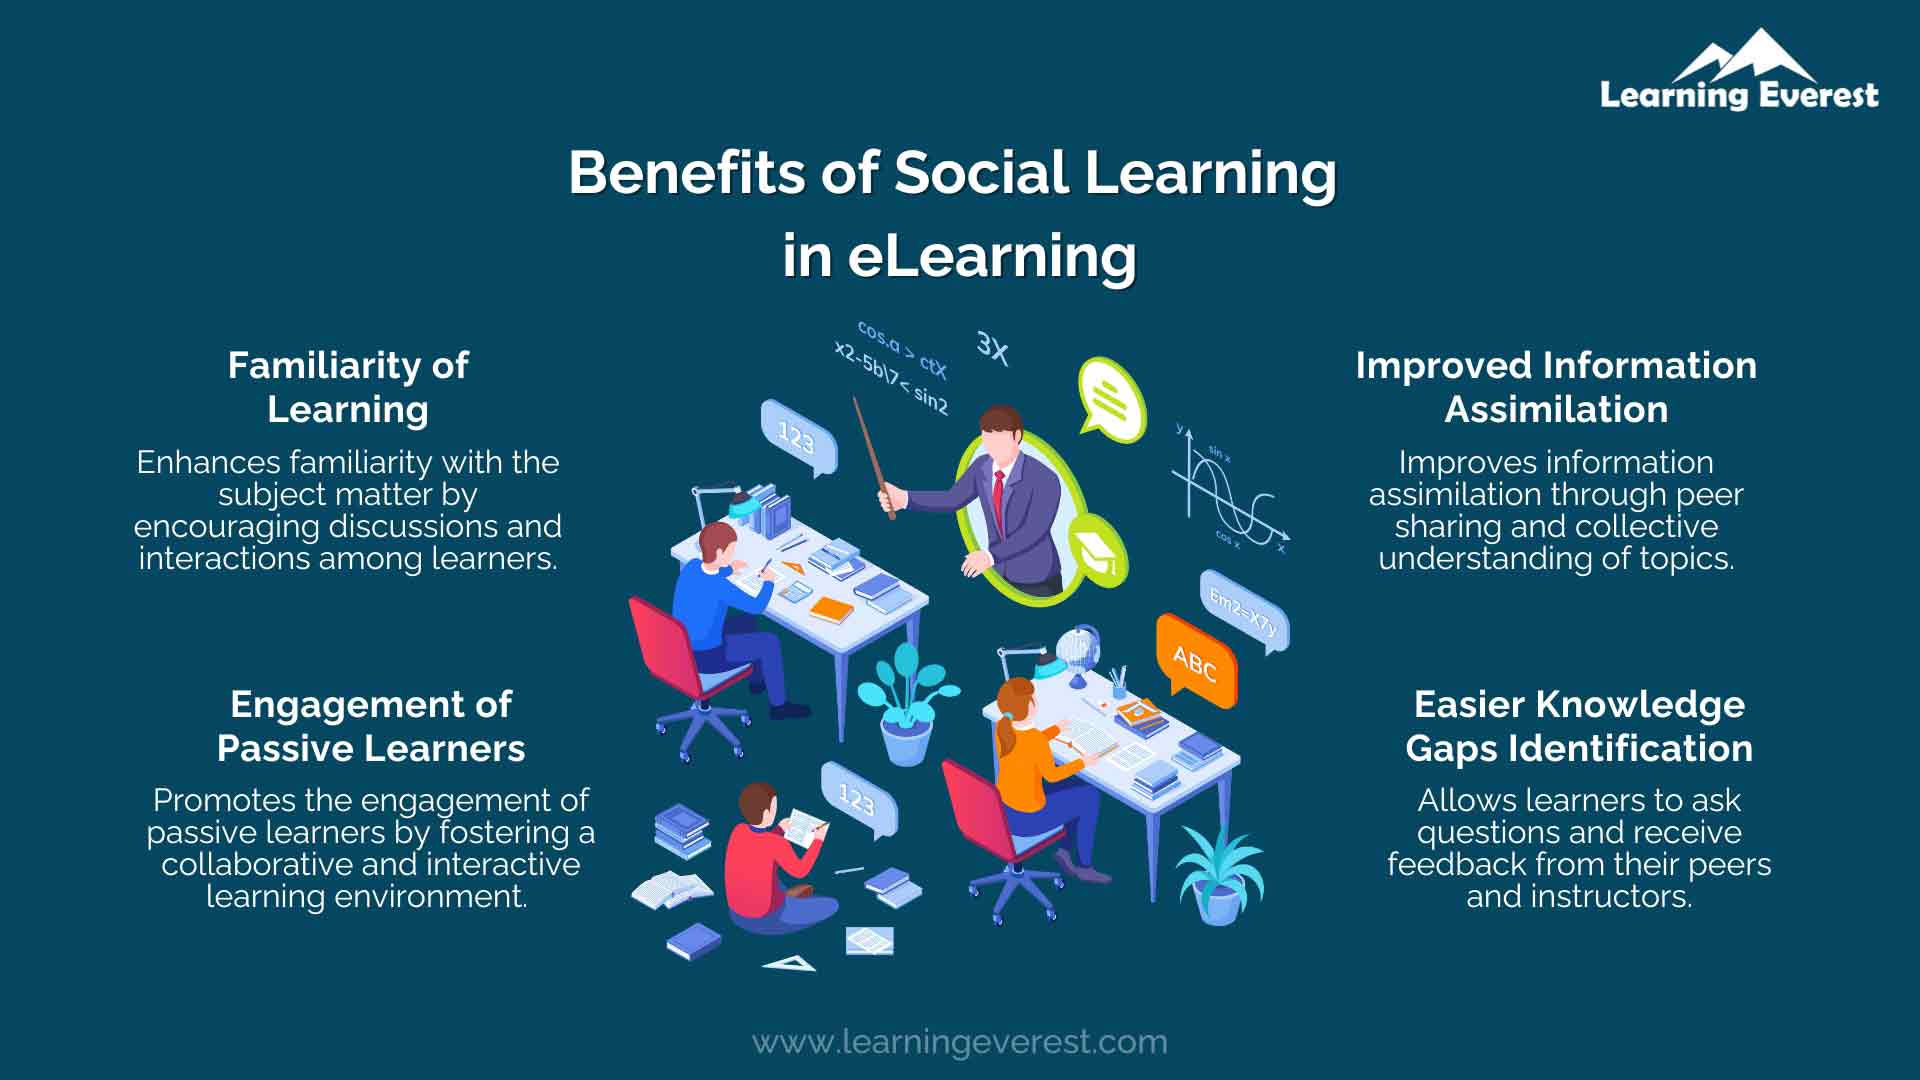 Requirements for eLearning - Social Learning and Collaboration